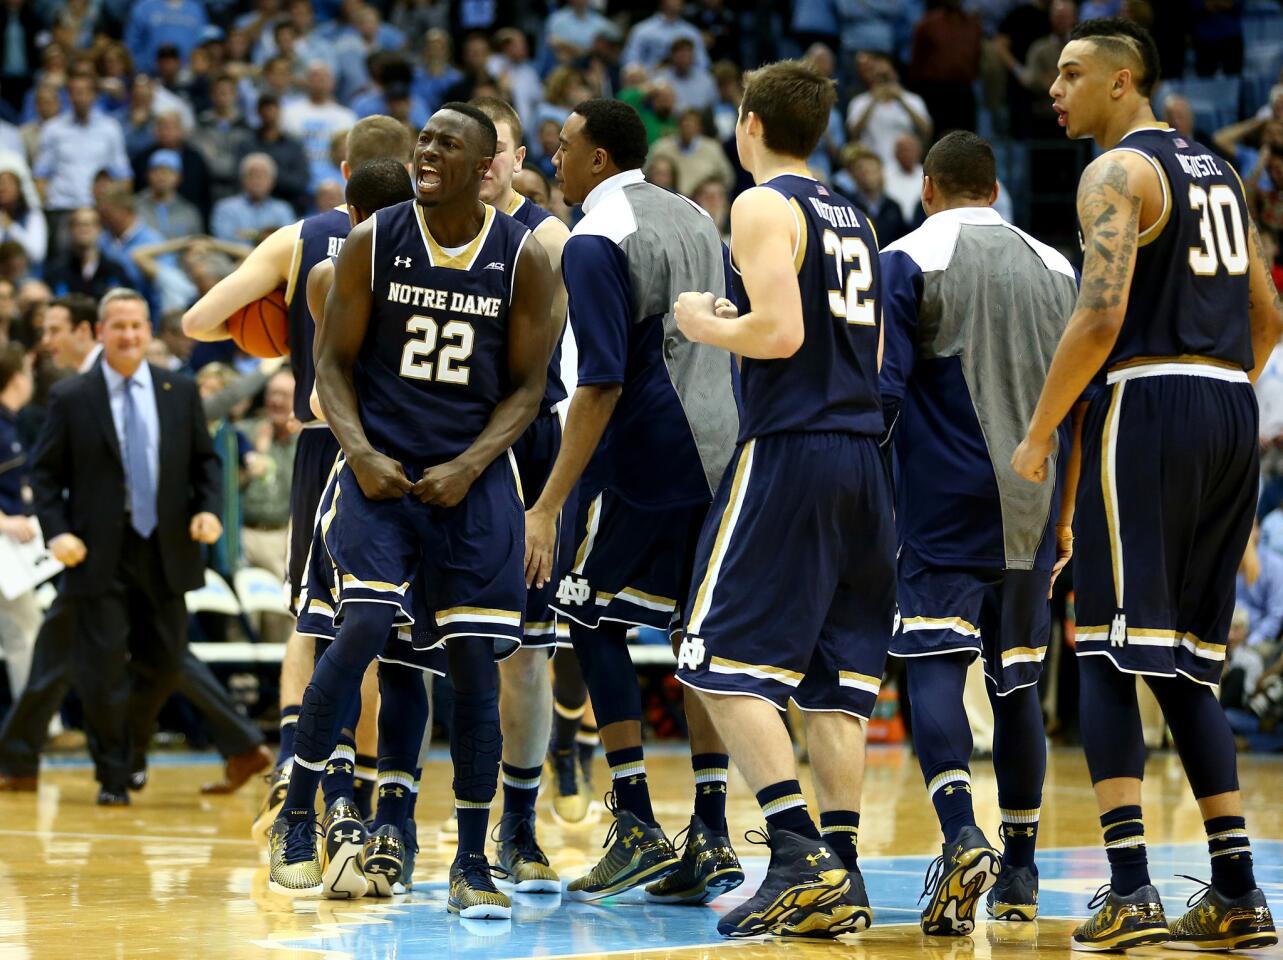 Notre Dame's Jerian Grant and his teammates celebrate after defeating North Carolina.